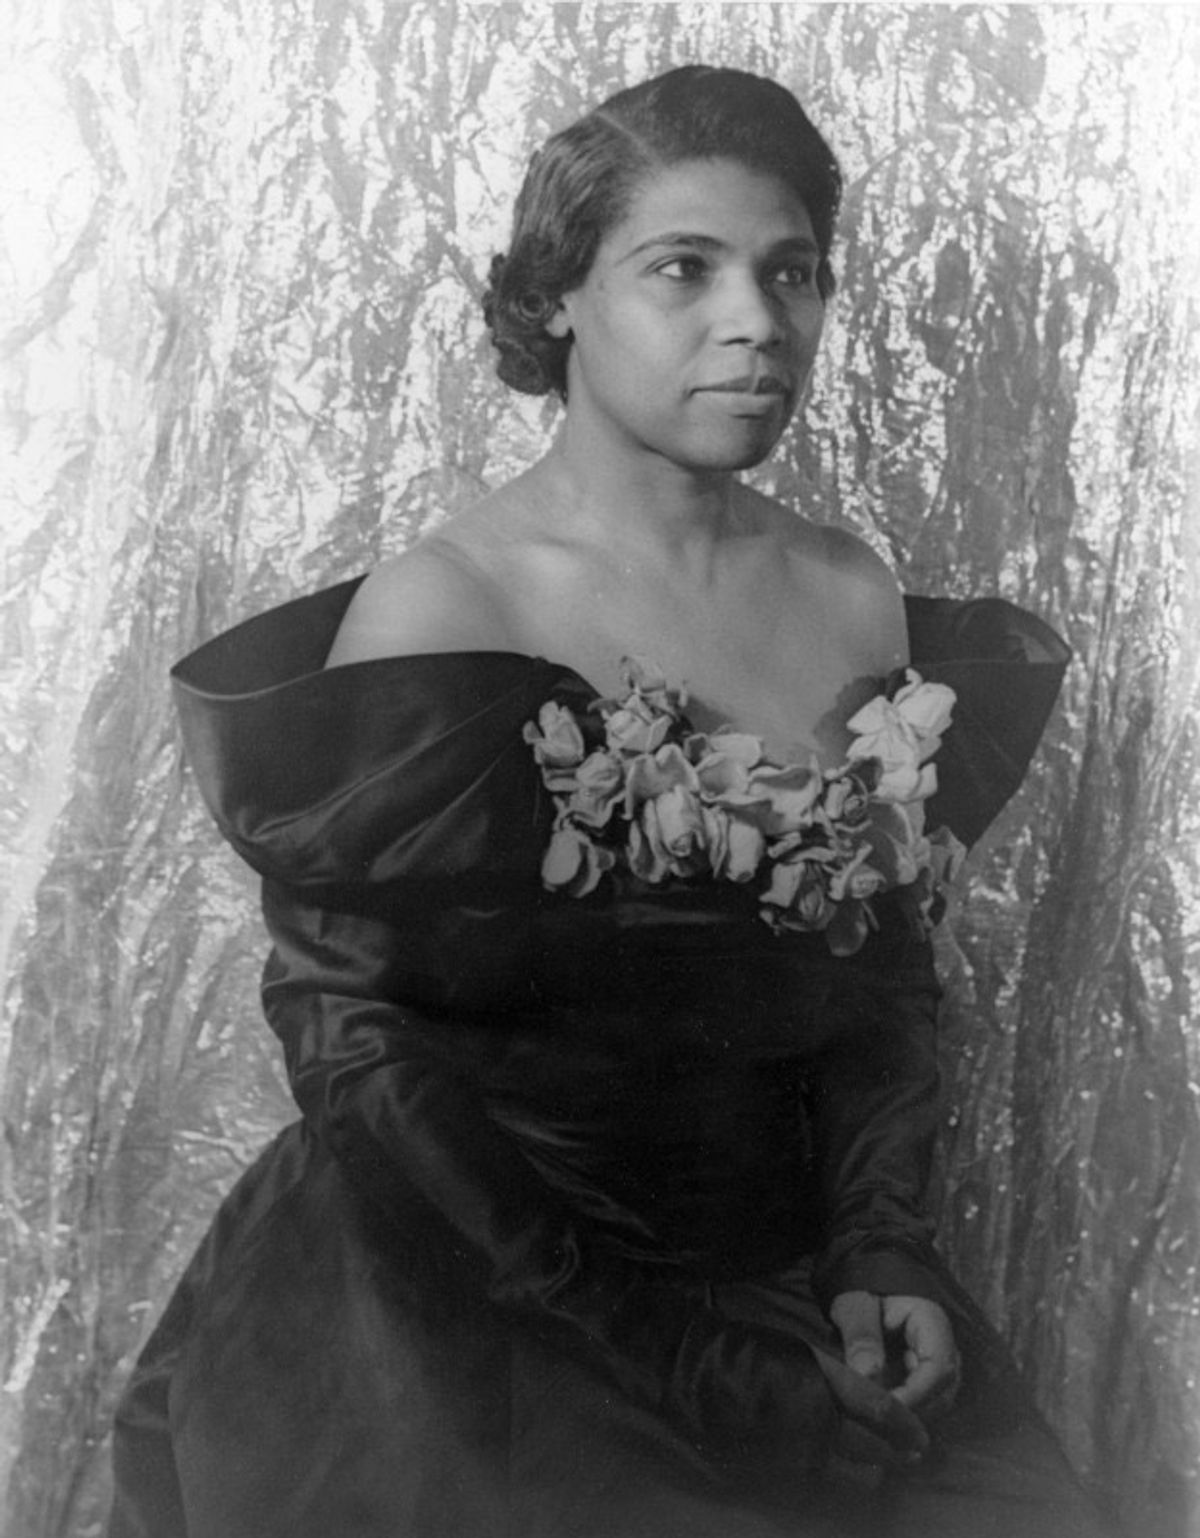 The National Marian Anderson Historical Society and Museum, one of the recipients of the grant, will renovate the Philadelphia home of the late opera singer Marian Anderson National Trust for Historic Preservation